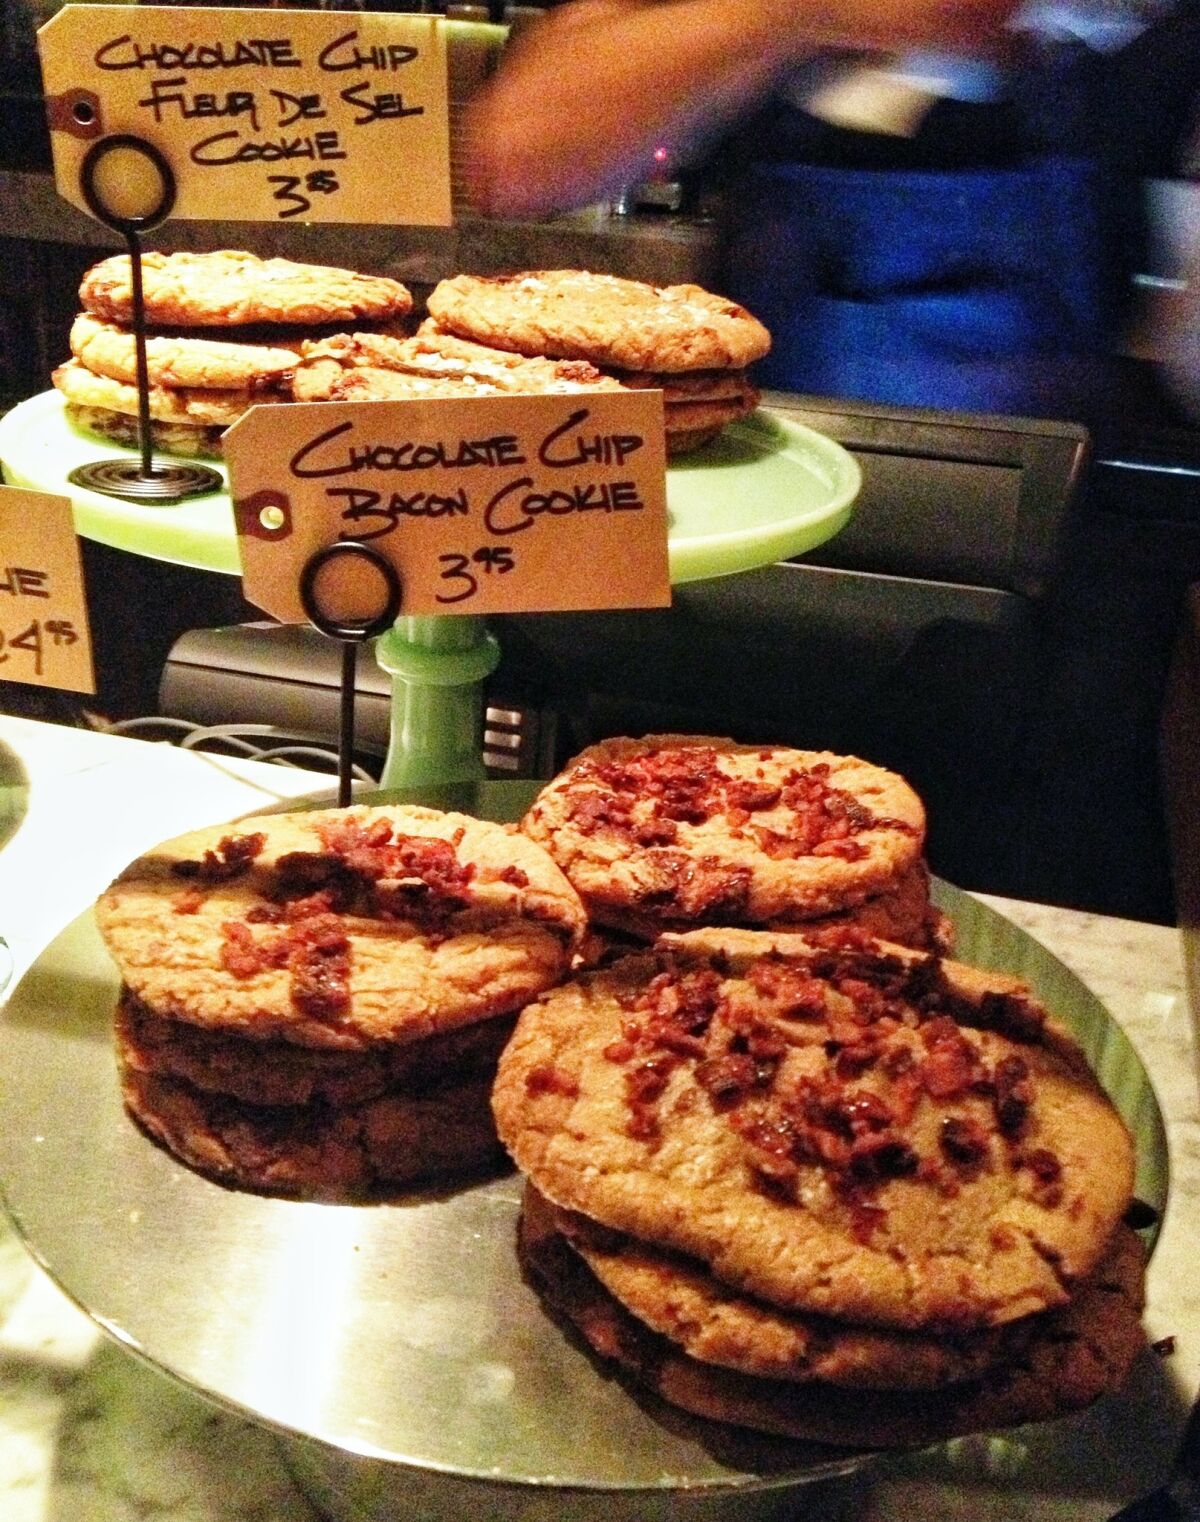 Chocolate chip bacon cookies at the new Stella Barra in Hollywood.